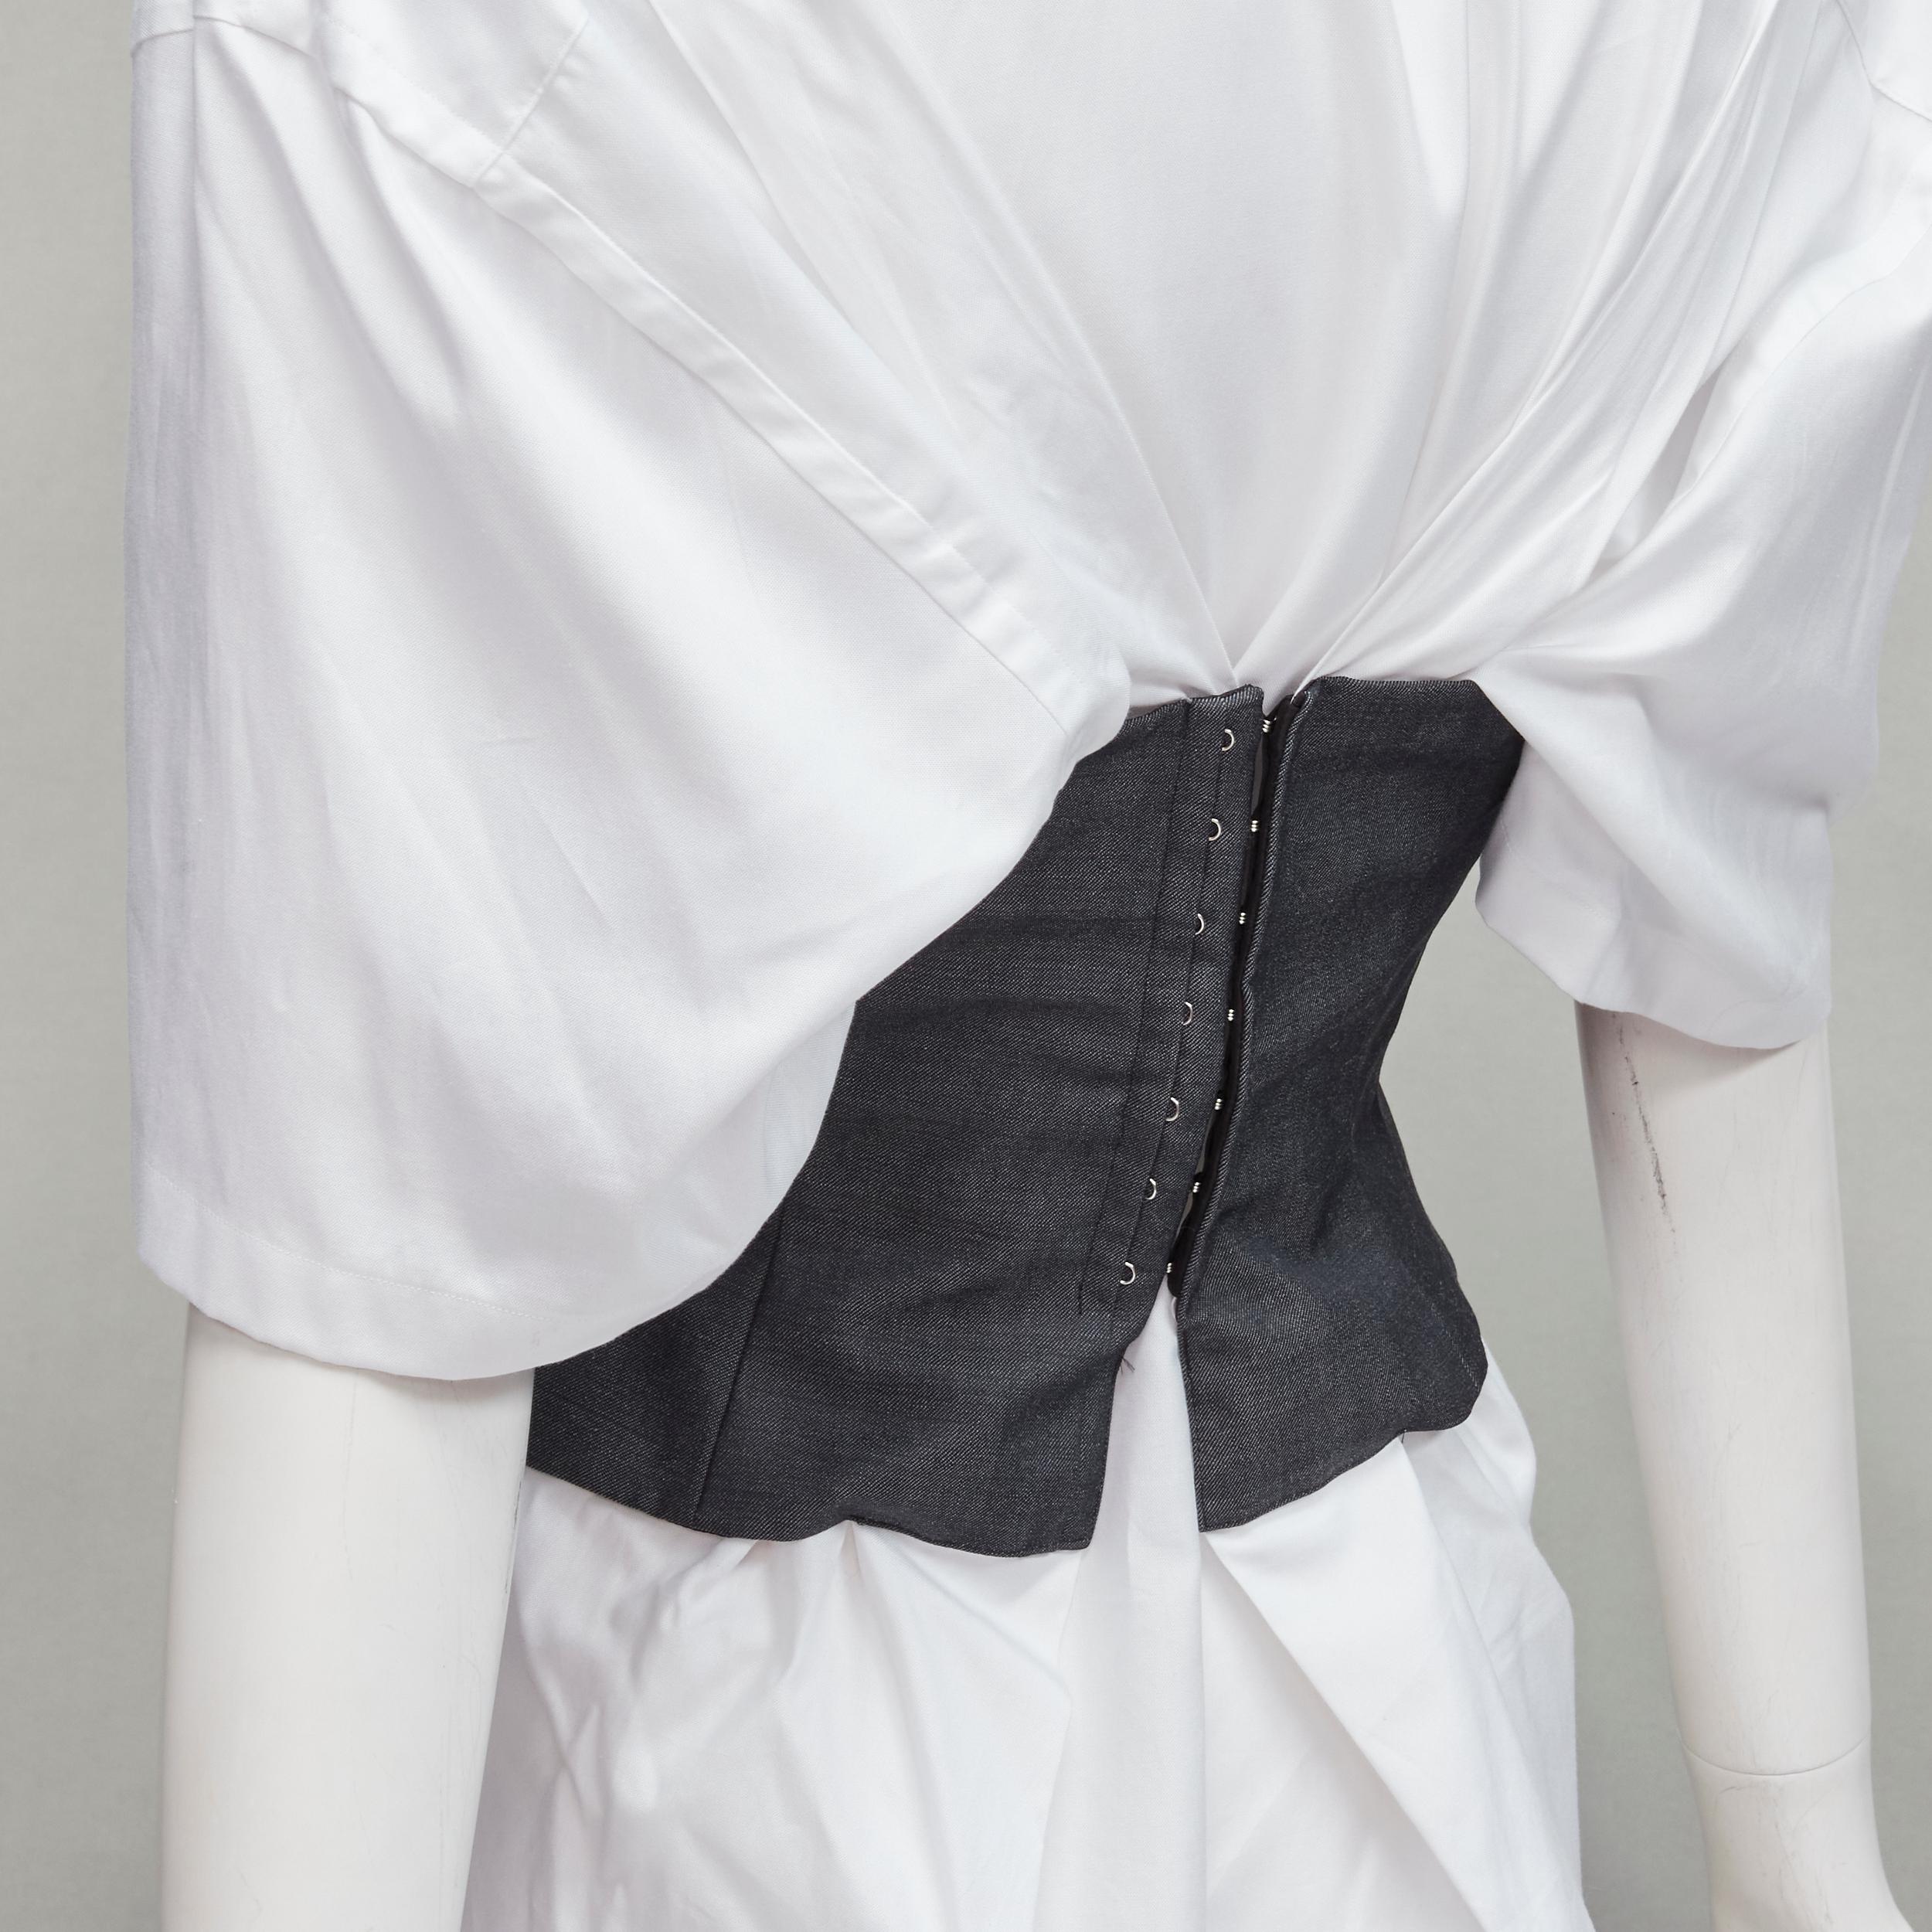 JUNYA WATANABE 2018 grey bias cut bustier deconstructed gathered back shirt XS
Reference: AAWC/A00273
Brand: Junya Watanabe
Designer: Junya Watanabe
Collection: 2018
Material: Cotton
Color: Grey, White
Pattern: Solid
Closure: Hook & Eye
Extra